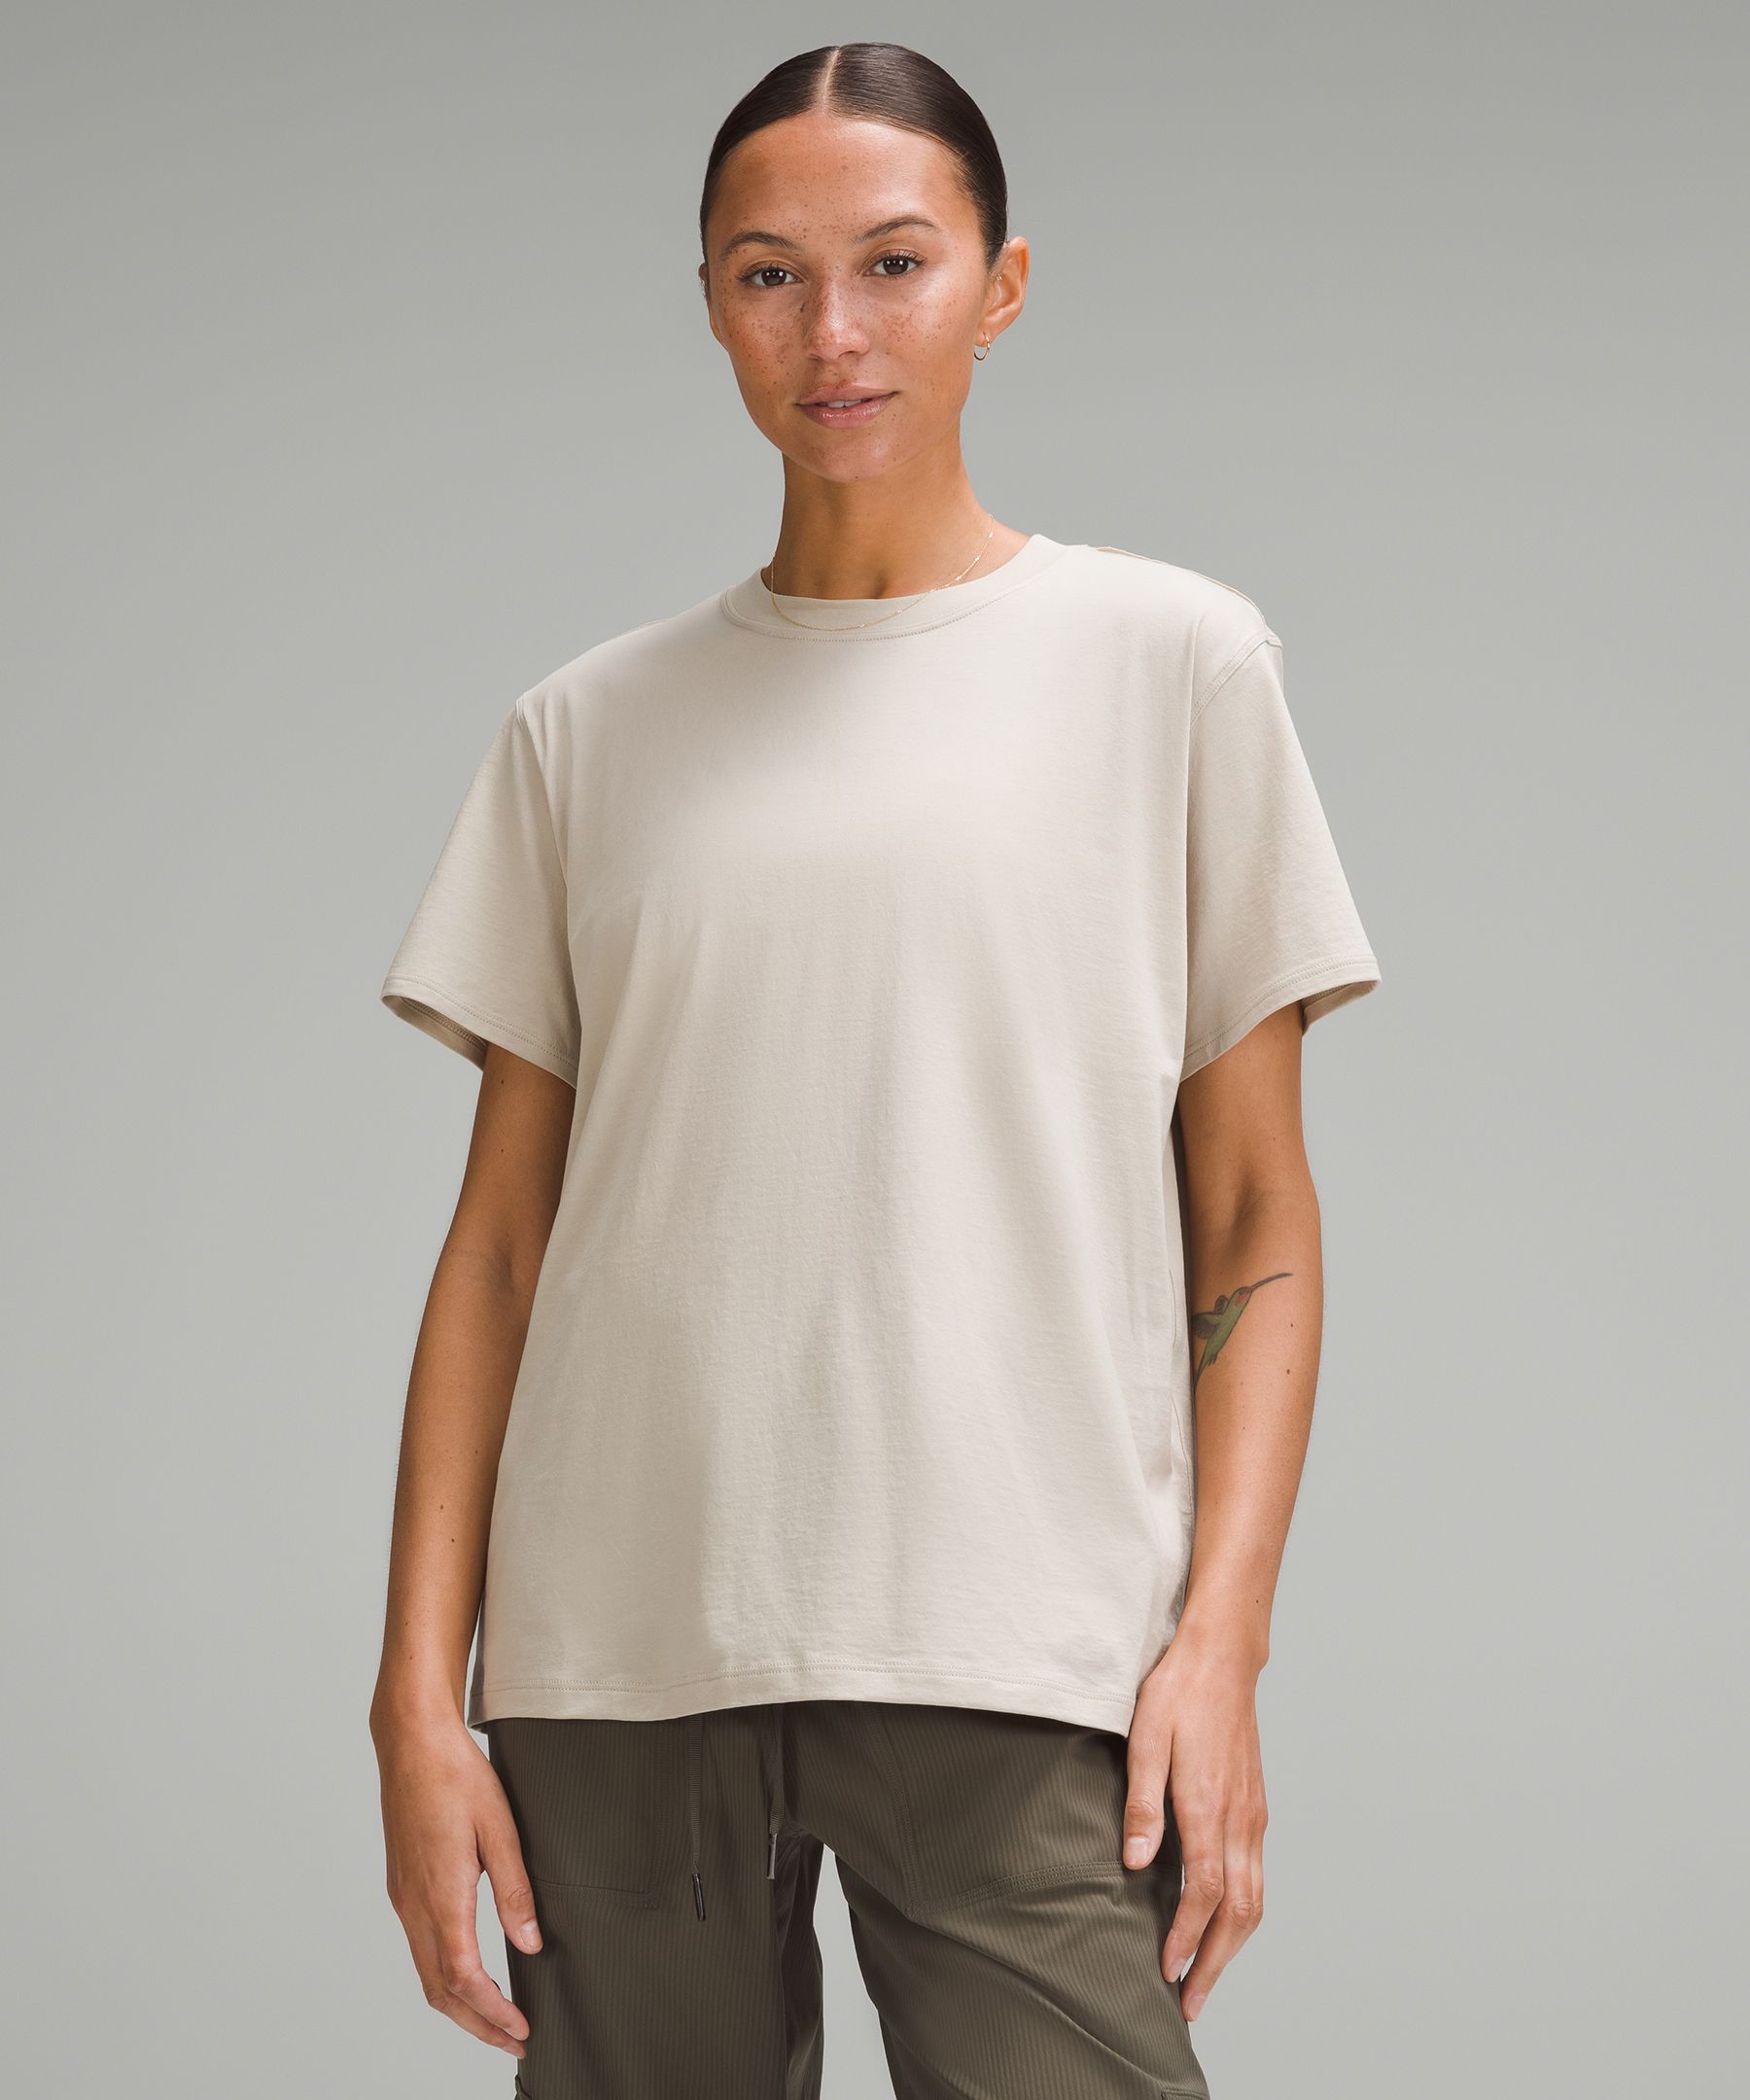 Lululemon All Yours Cotton T-shirt In Neutral